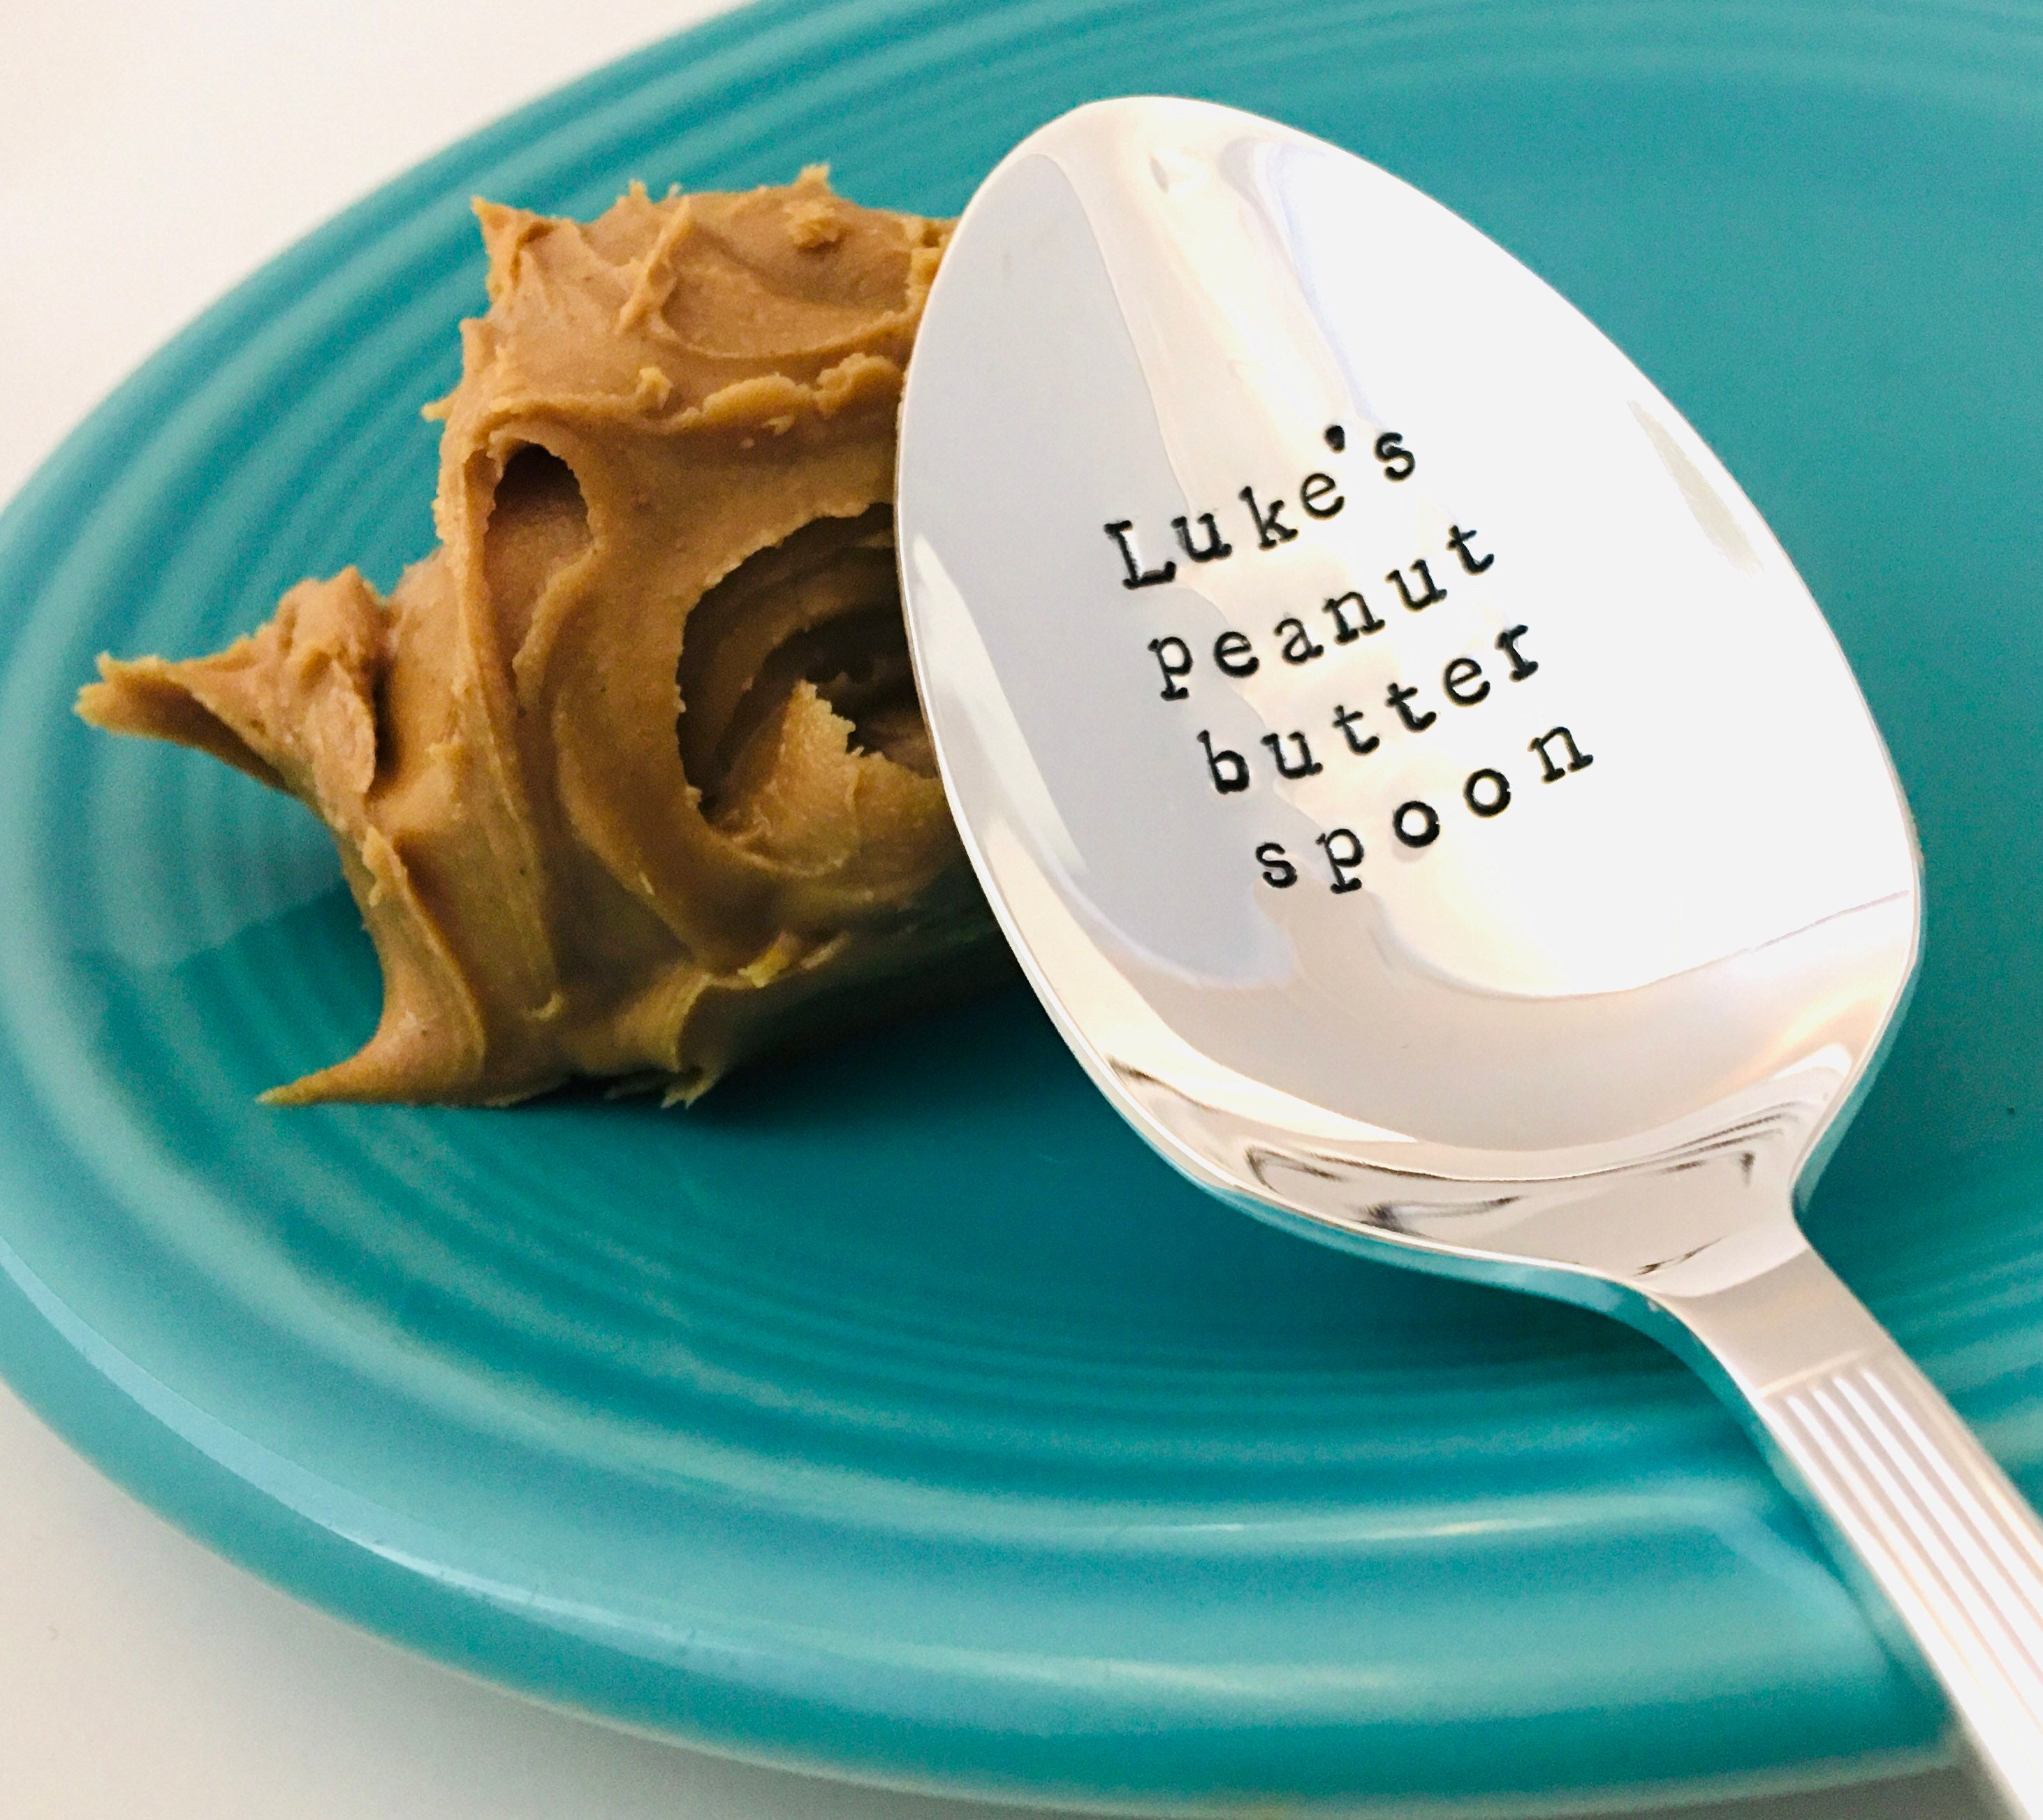 Peanut butter spoon amazin gift - Royal Spoons - Best gifts ever